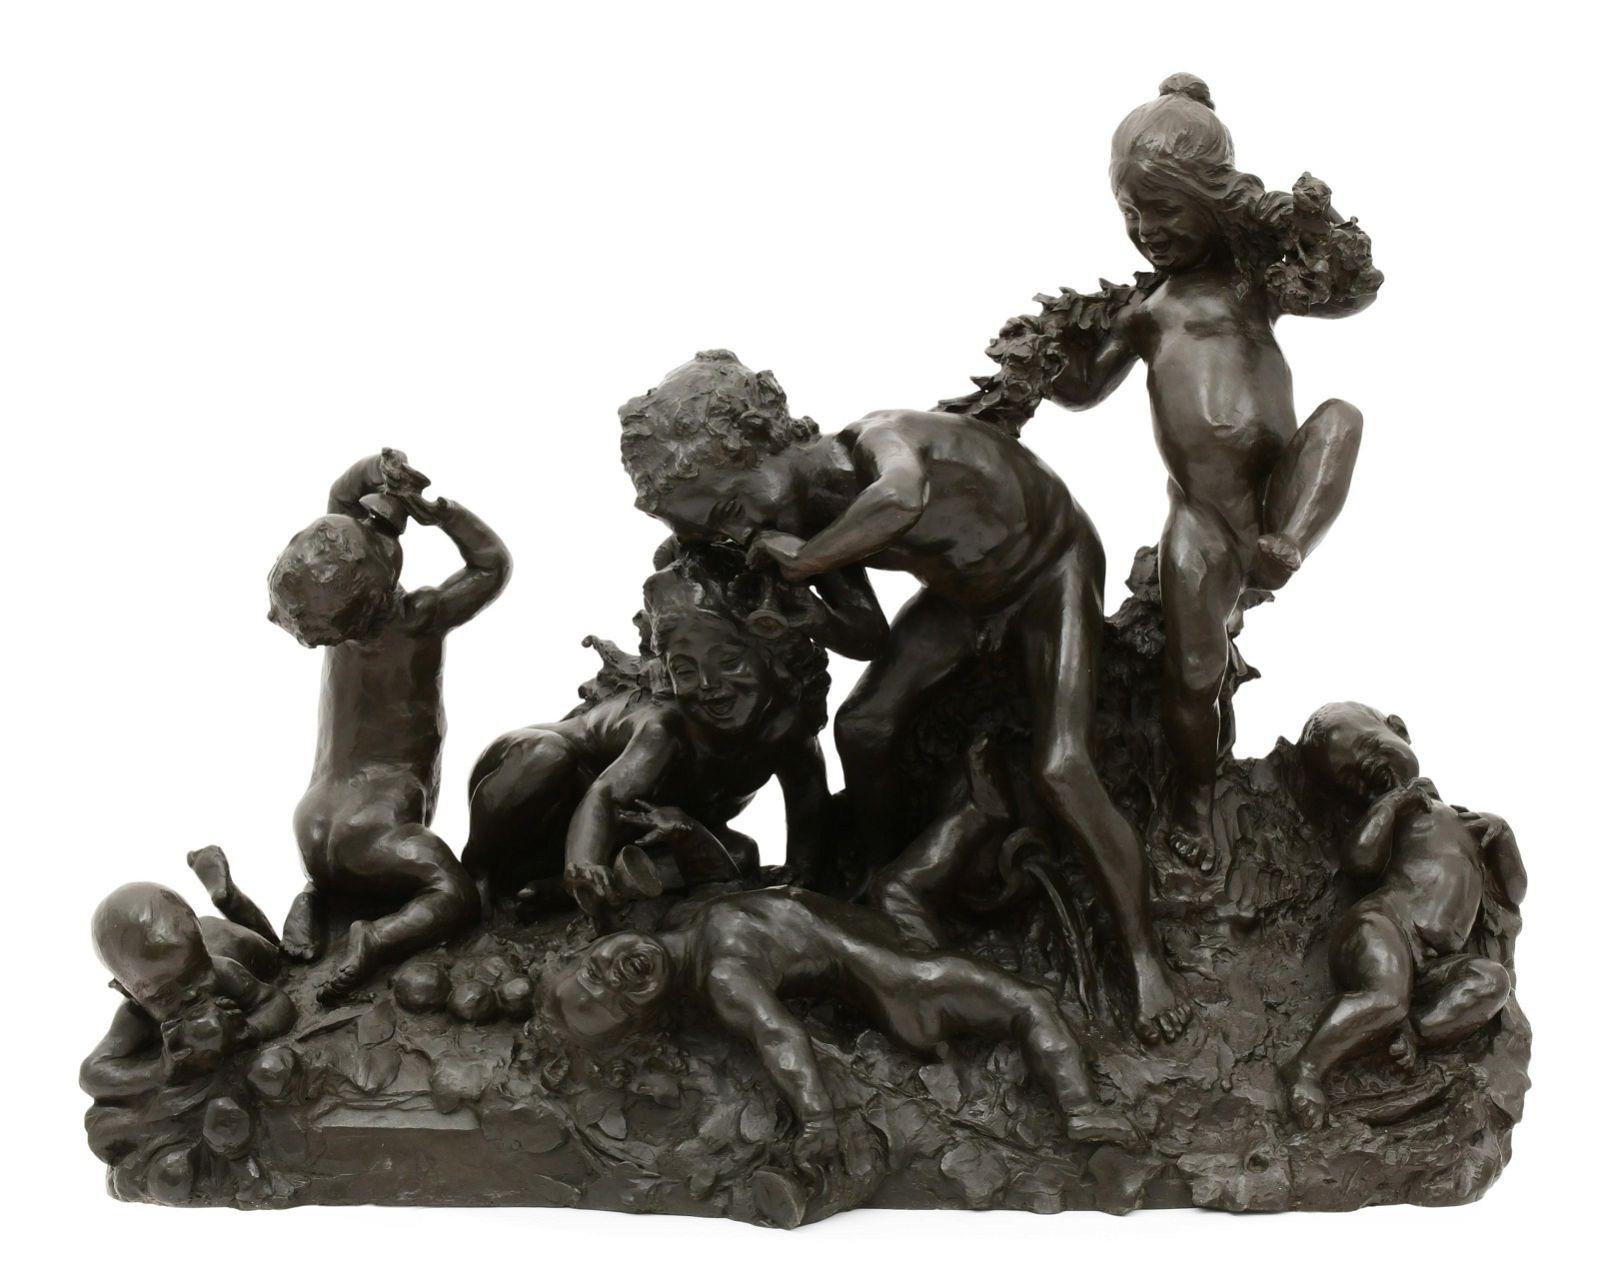 Very large and finely cast bronze sculpture of frolicking cherubs after the French sculptor, Joseph Gustave Cheret (1838-1894).